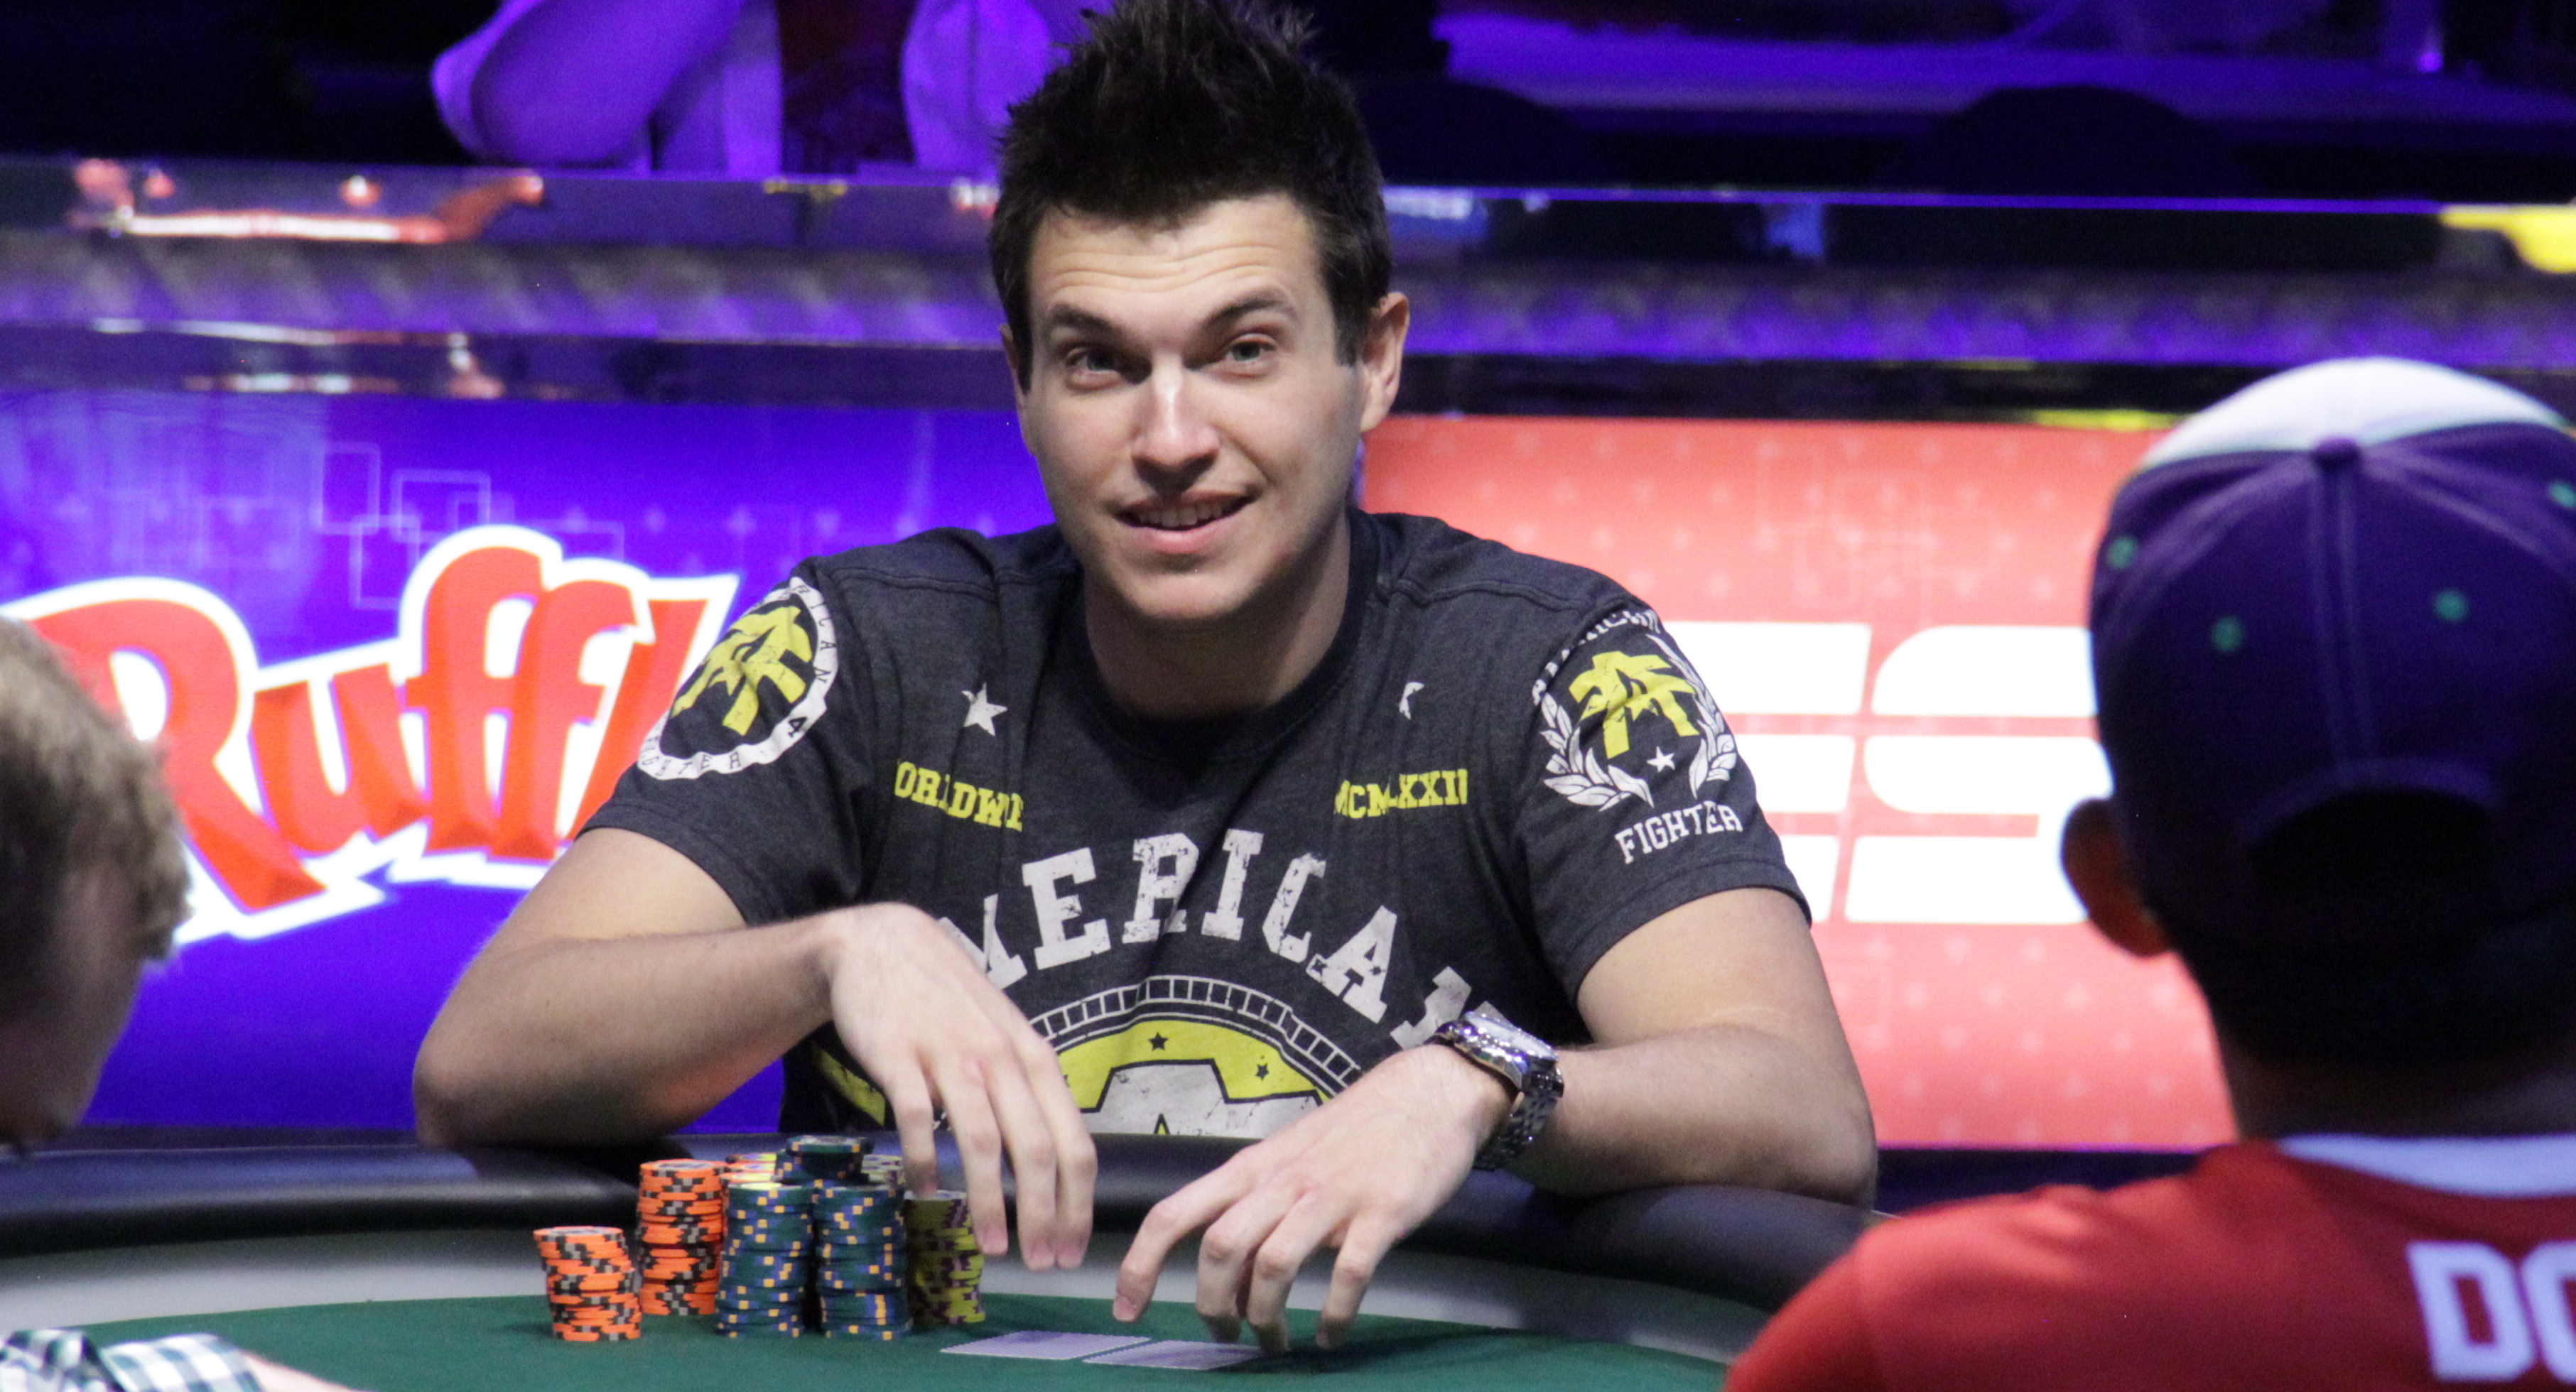 Professional poker player during a game